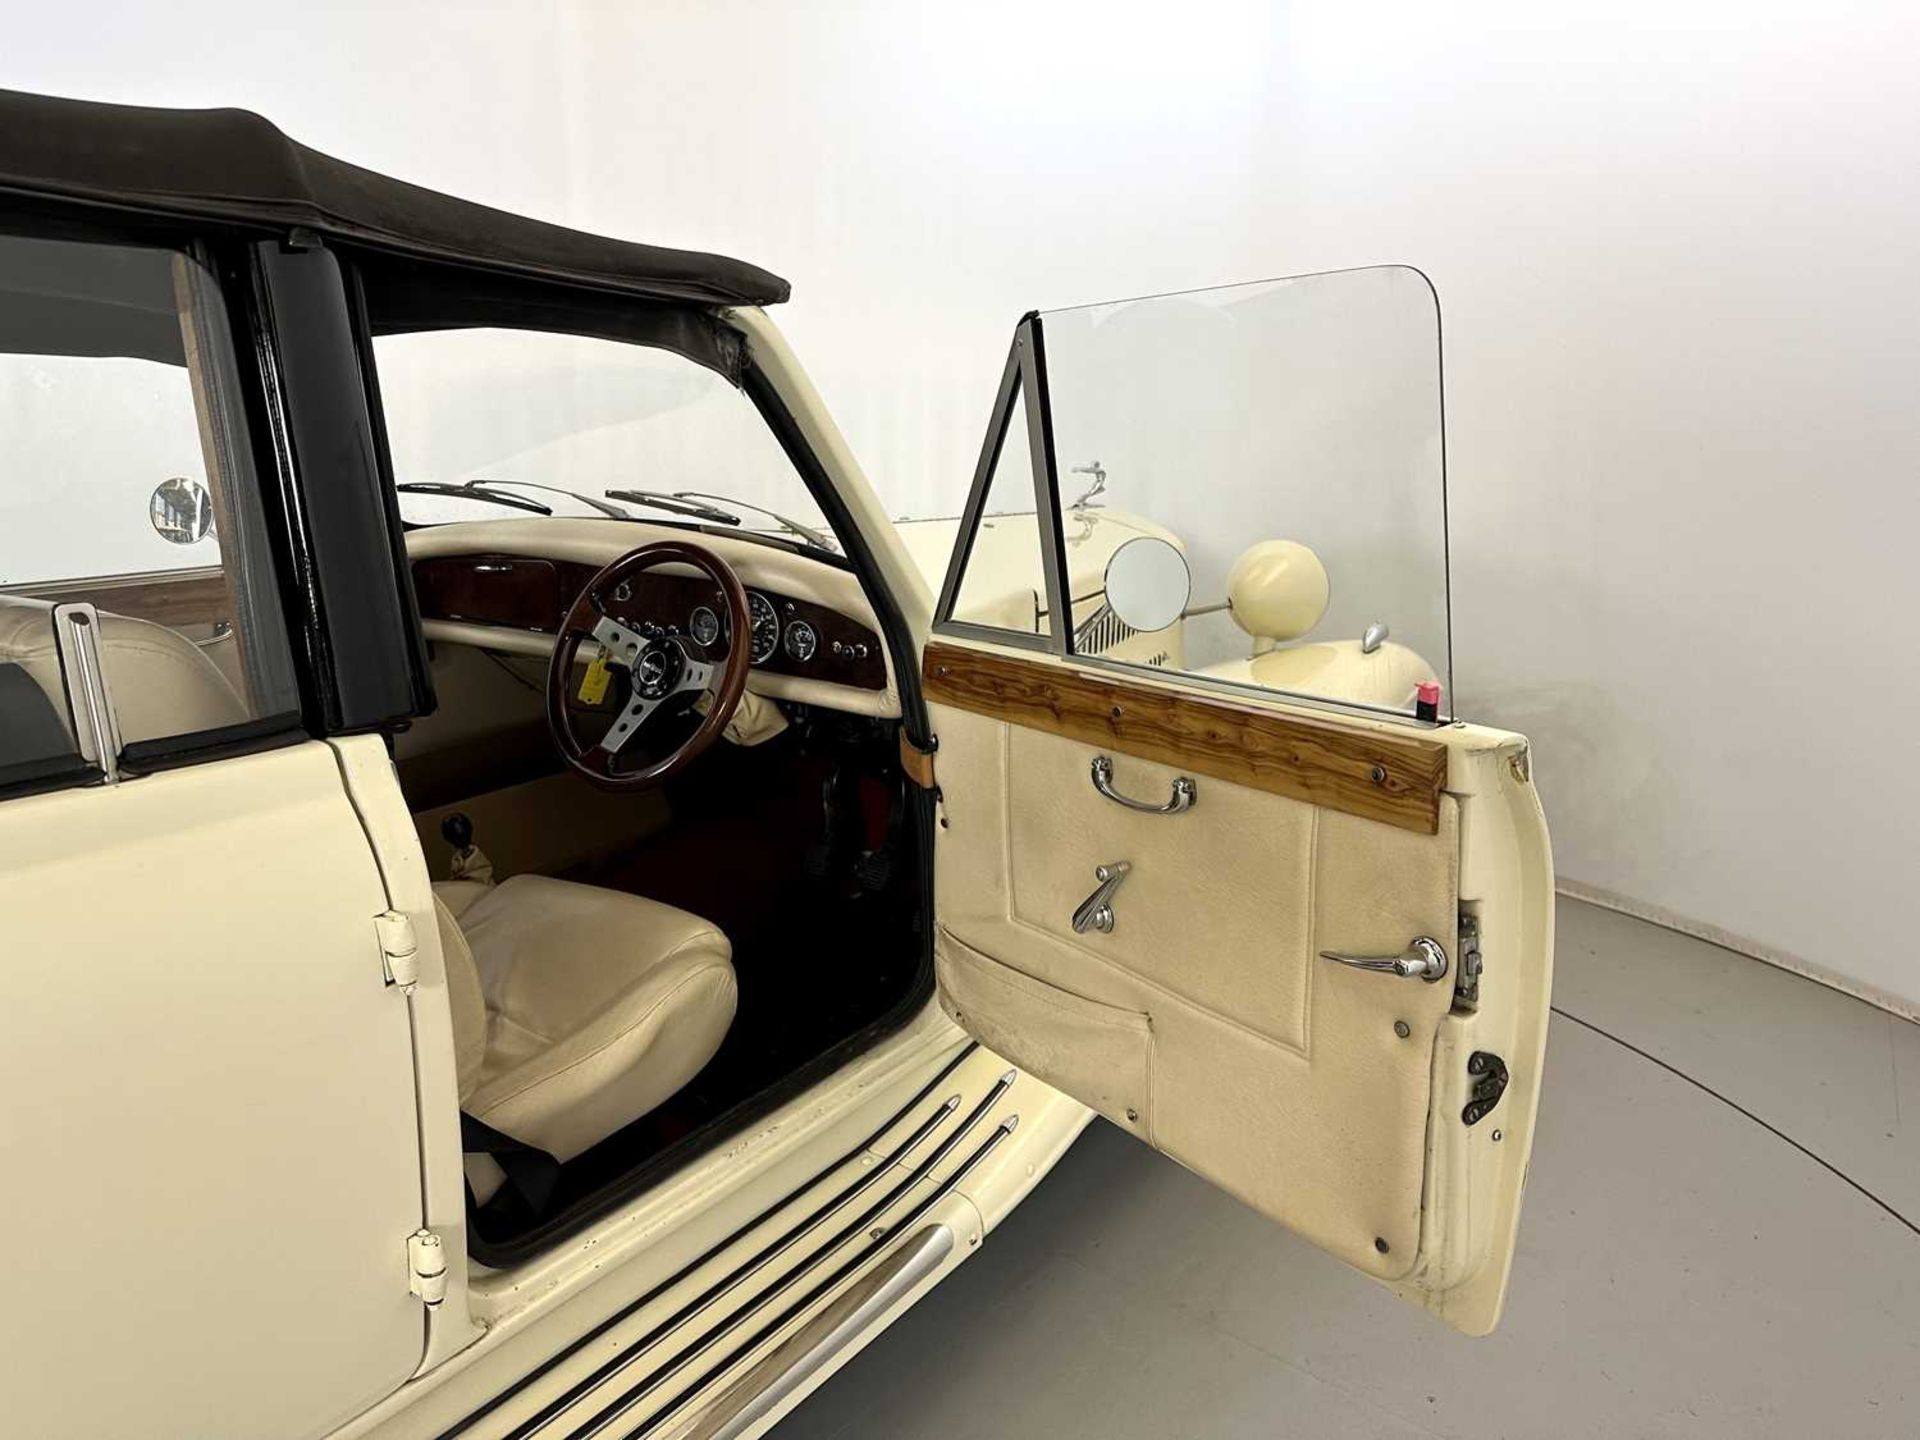 1979 Beauford S4 - Image 17 of 38